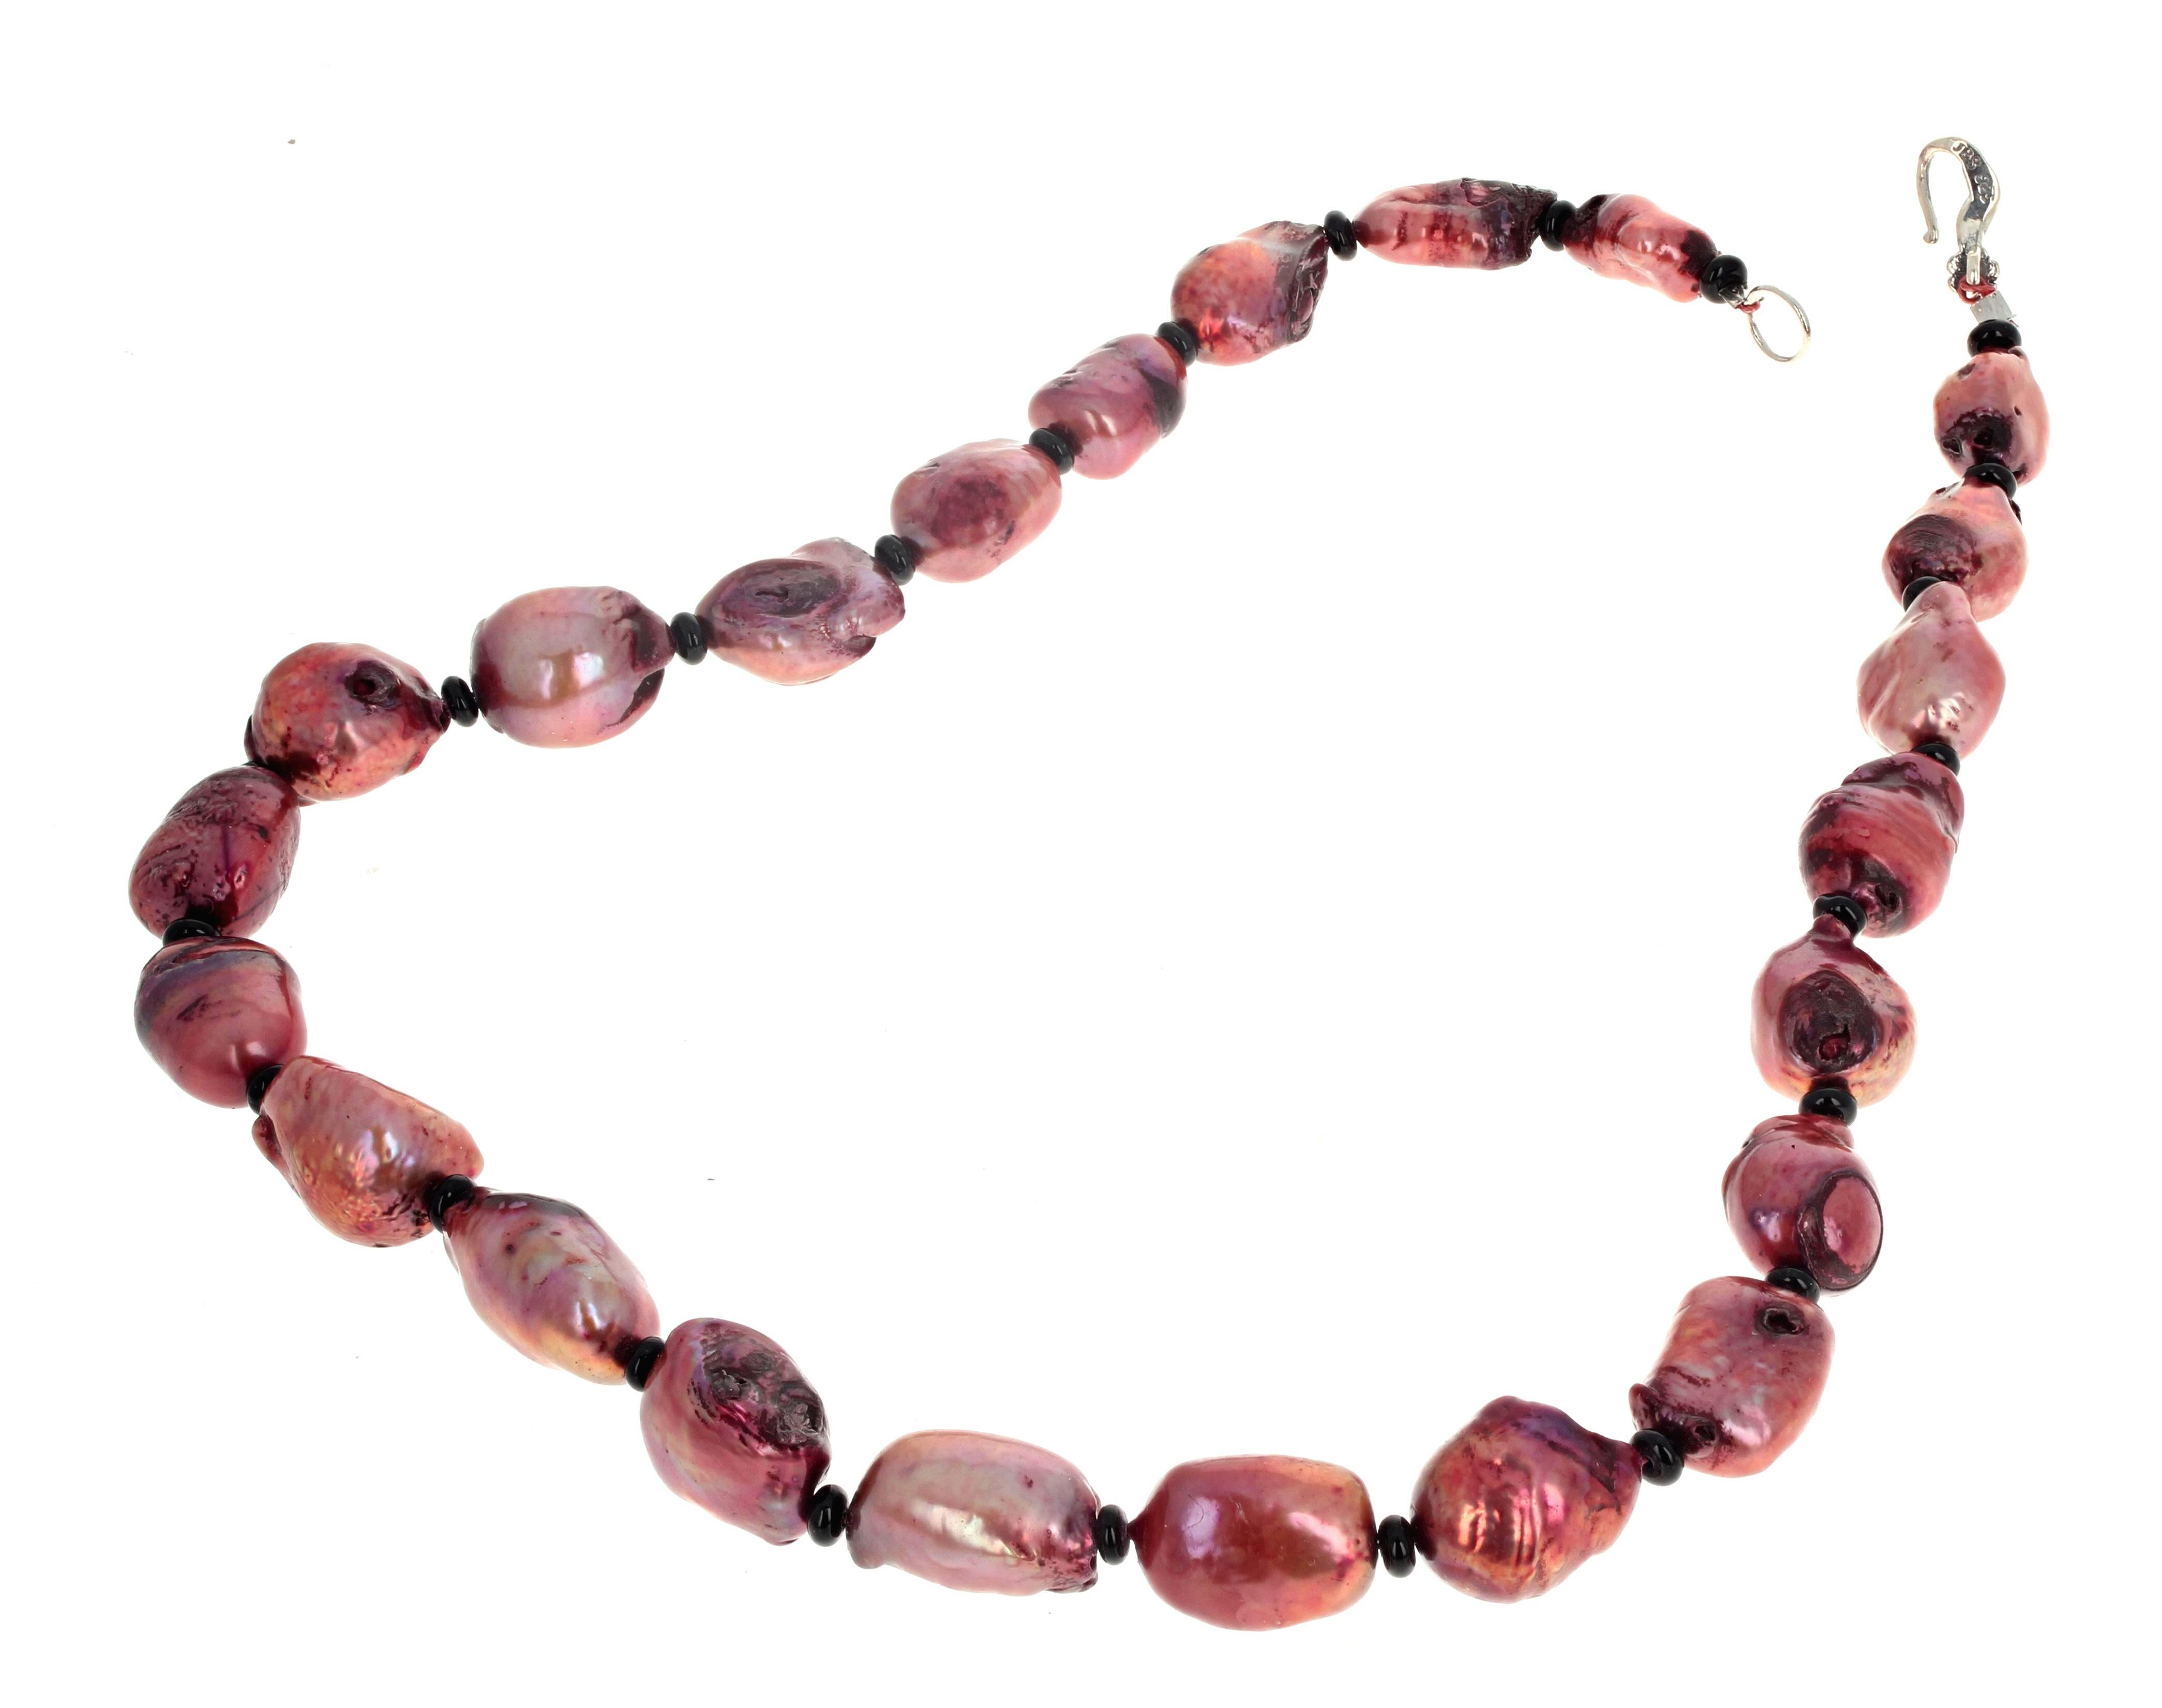 Women's or Men's AJD Very Rare Glowing Coppery Pink Cultured Pearl Necklace For Sale